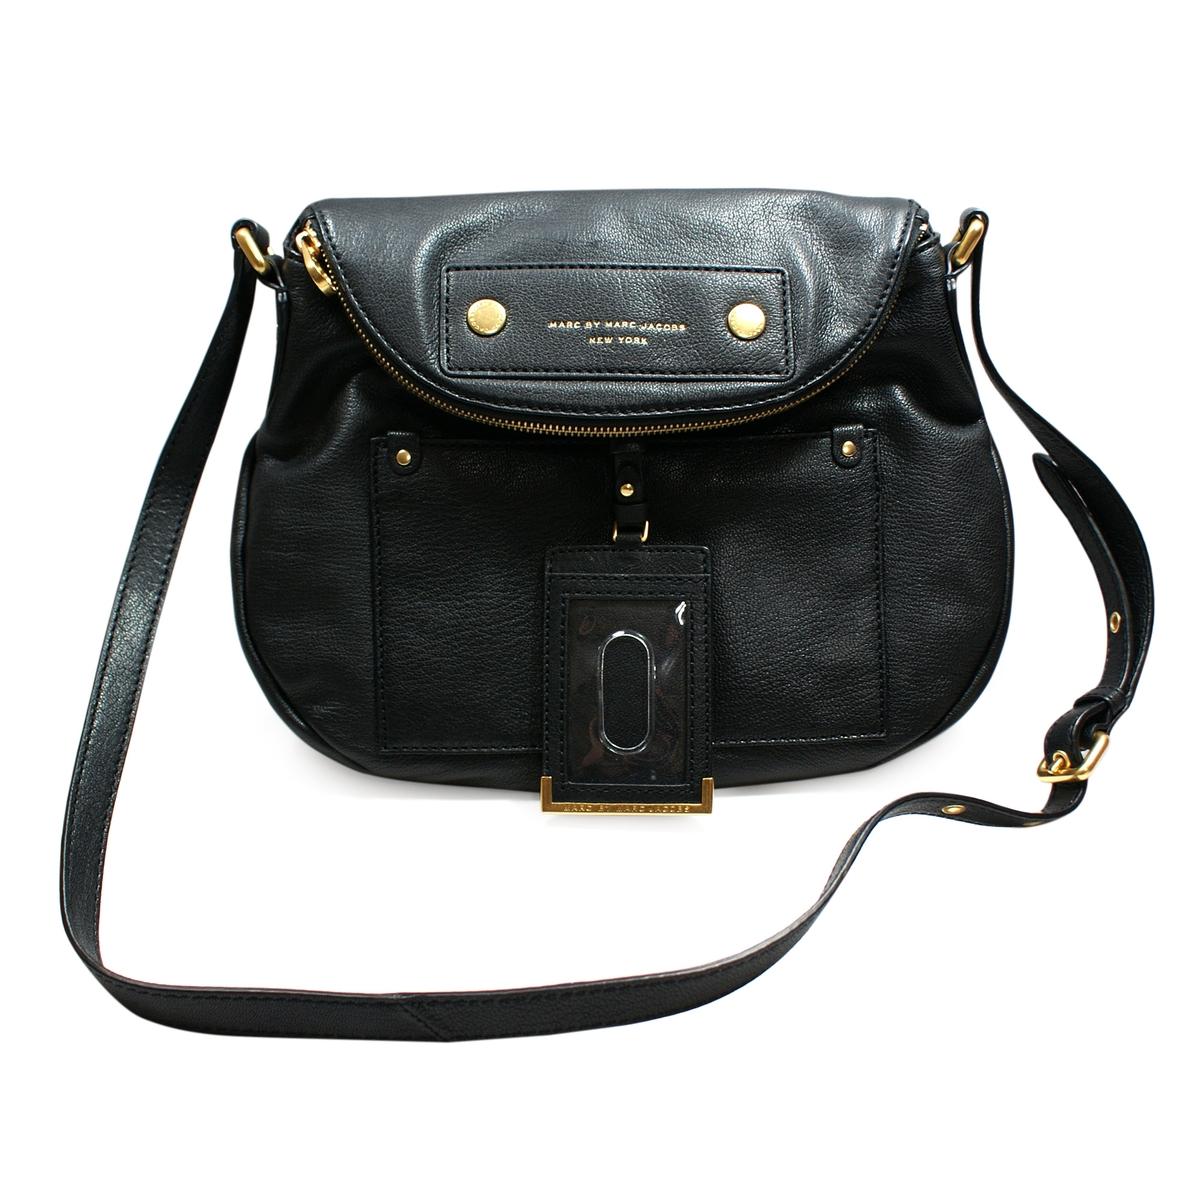 Home Marc By Marc Jacobs Black Leather Swing Cross Body Bag